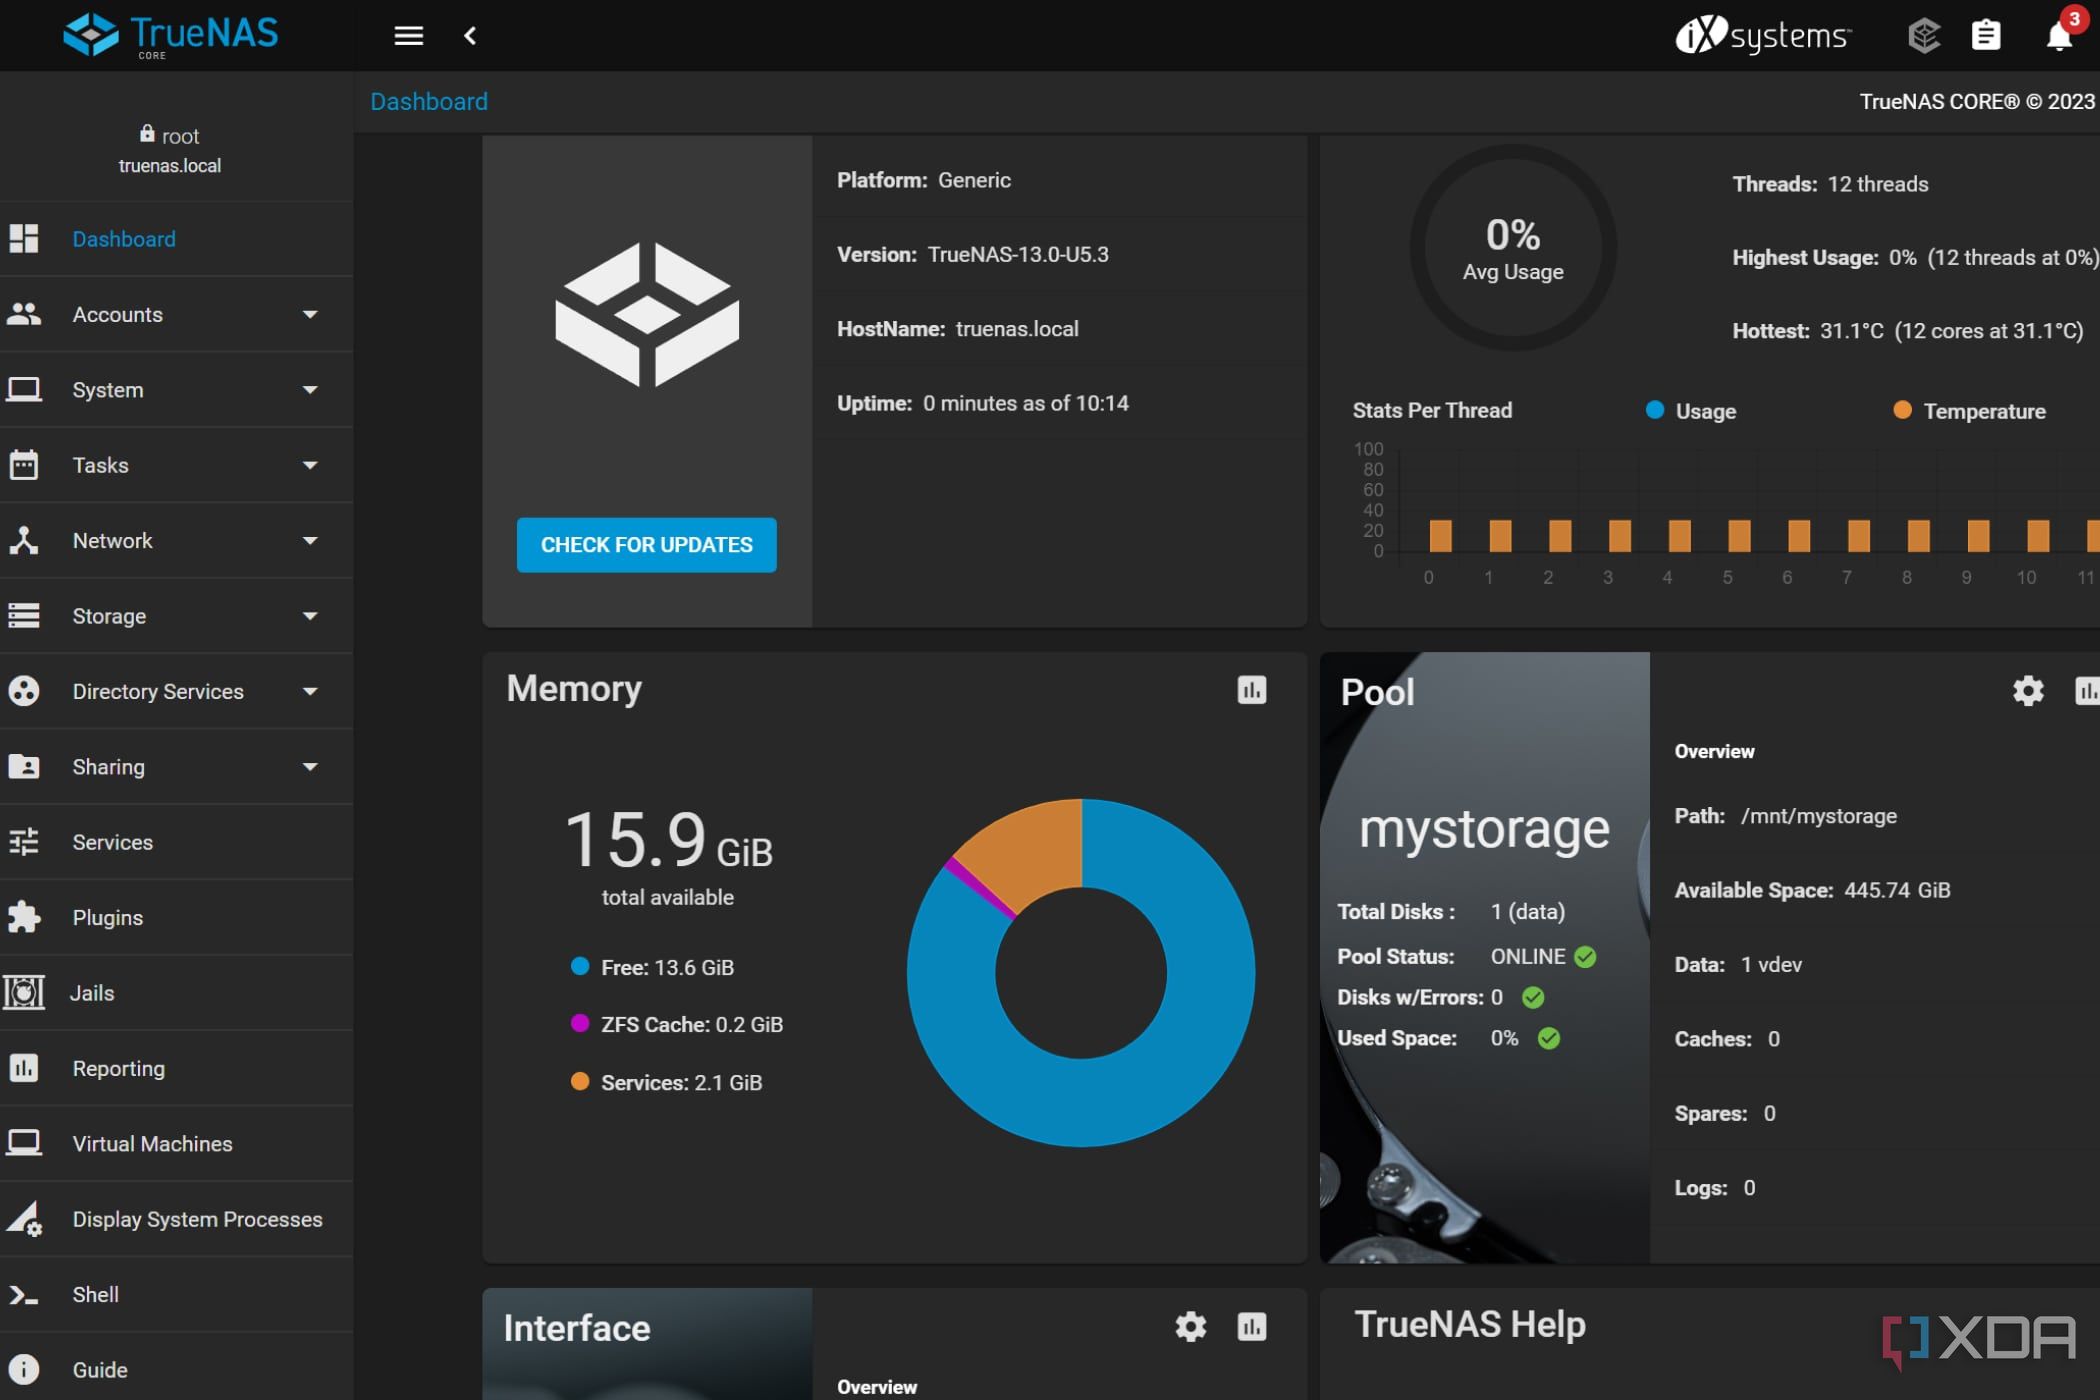 An overview of the TrueNAS CORE dashboard